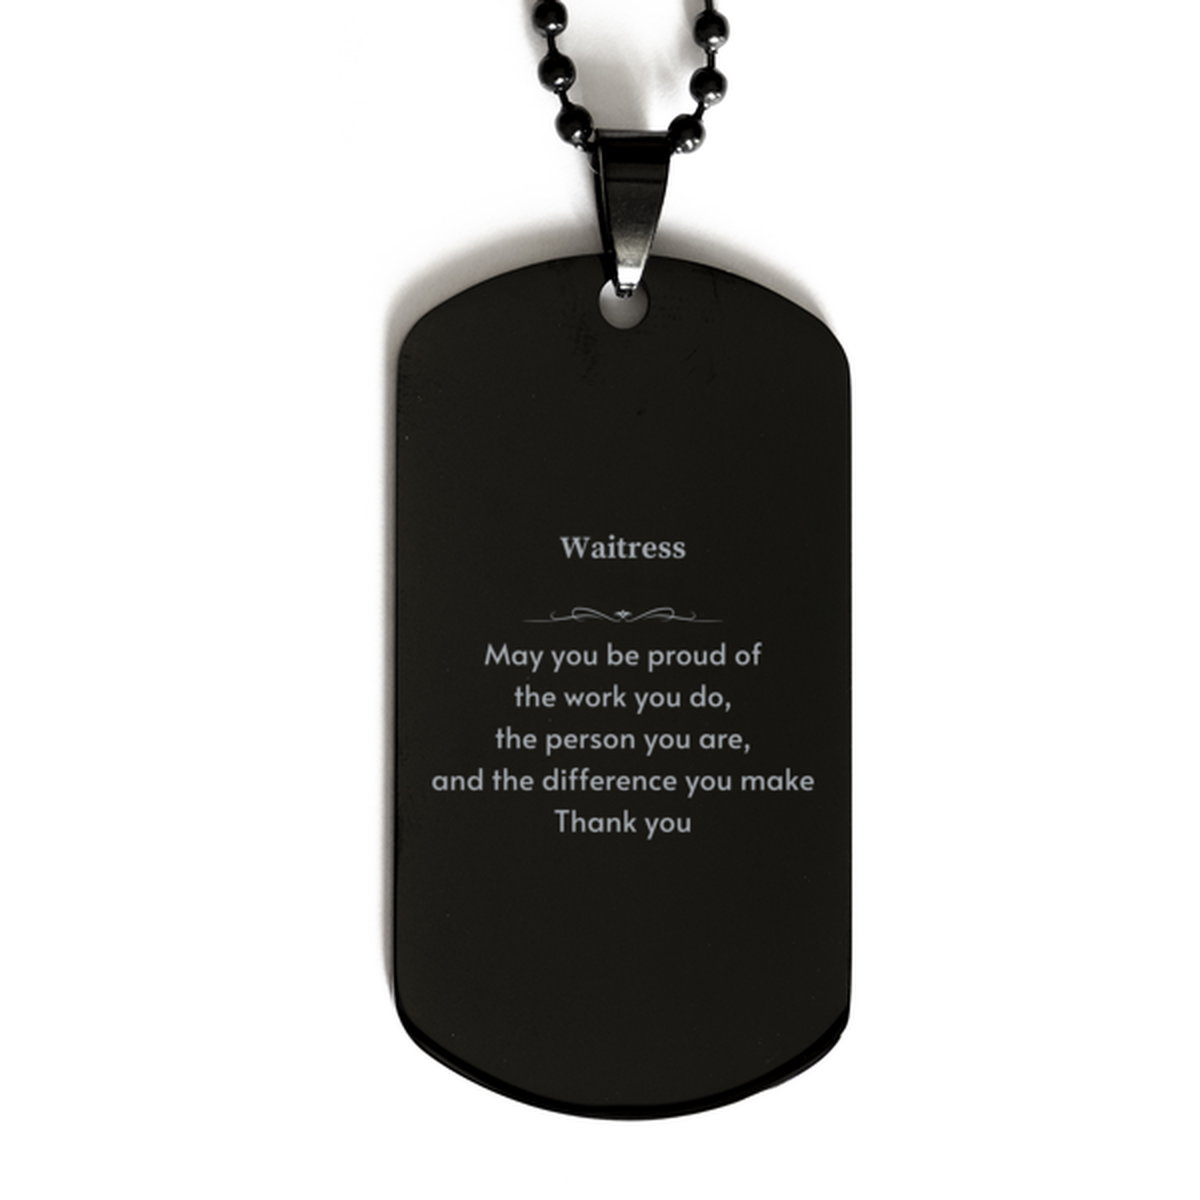 Heartwarming Black Dog Tag Retirement Coworkers Gifts for Waitress, Waitress May You be proud of the work you do, the person you are Gifts for Boss Men Women Friends